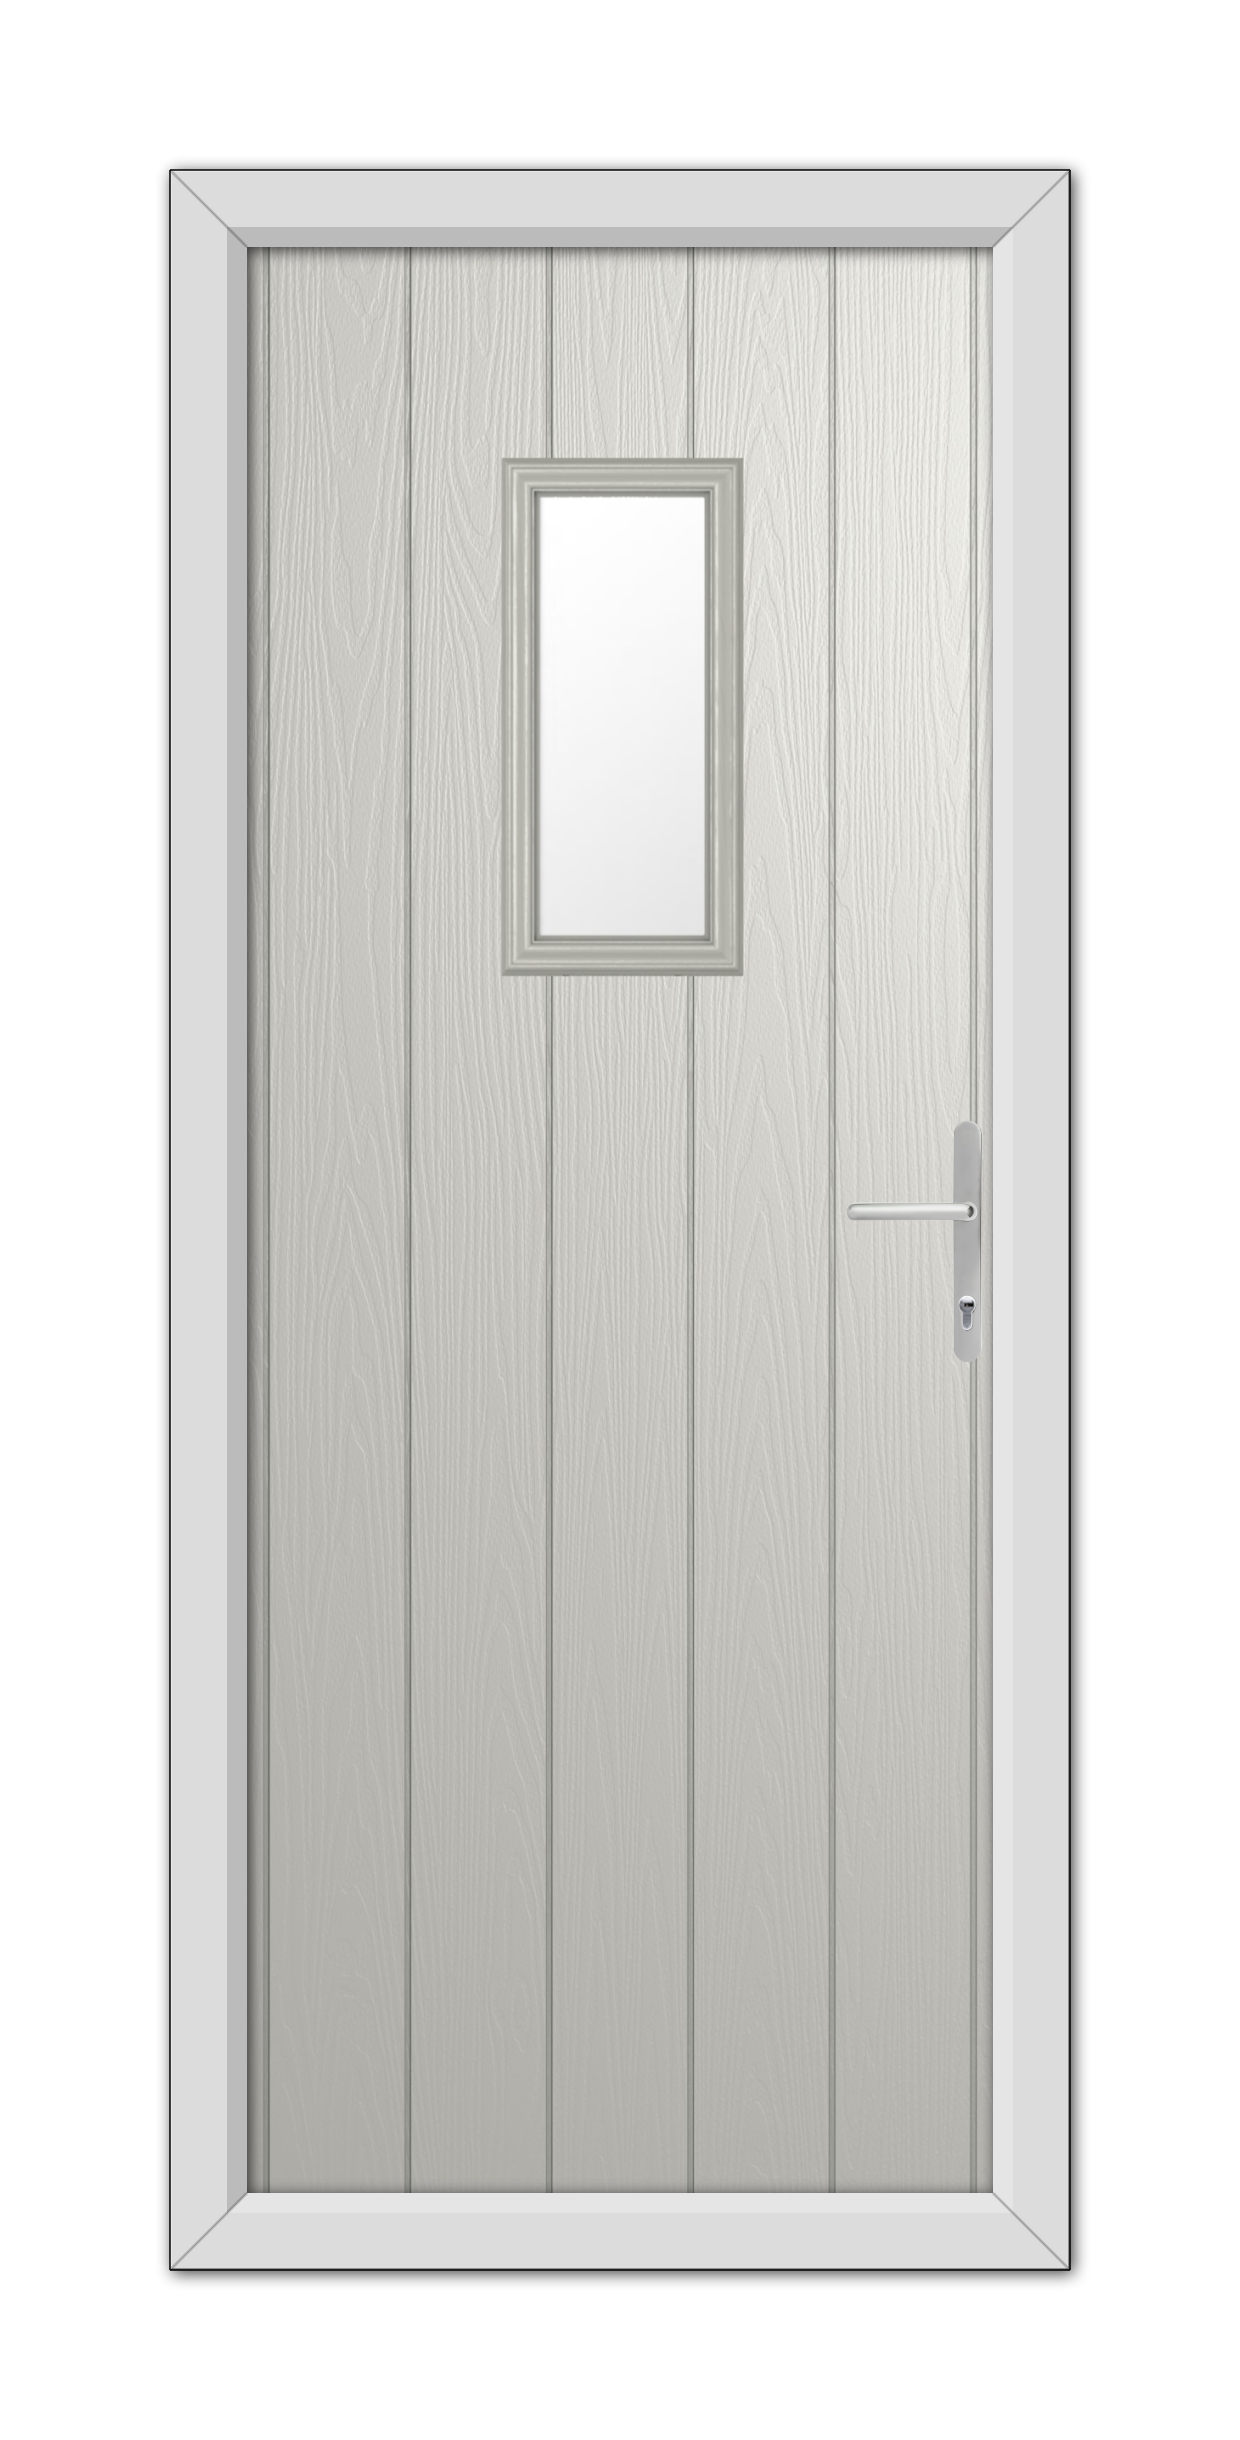 A modern, Agate Grey Somerset Composite Door 48mm Timber Core with a small square window and a metallic handle, set within a simple frame.